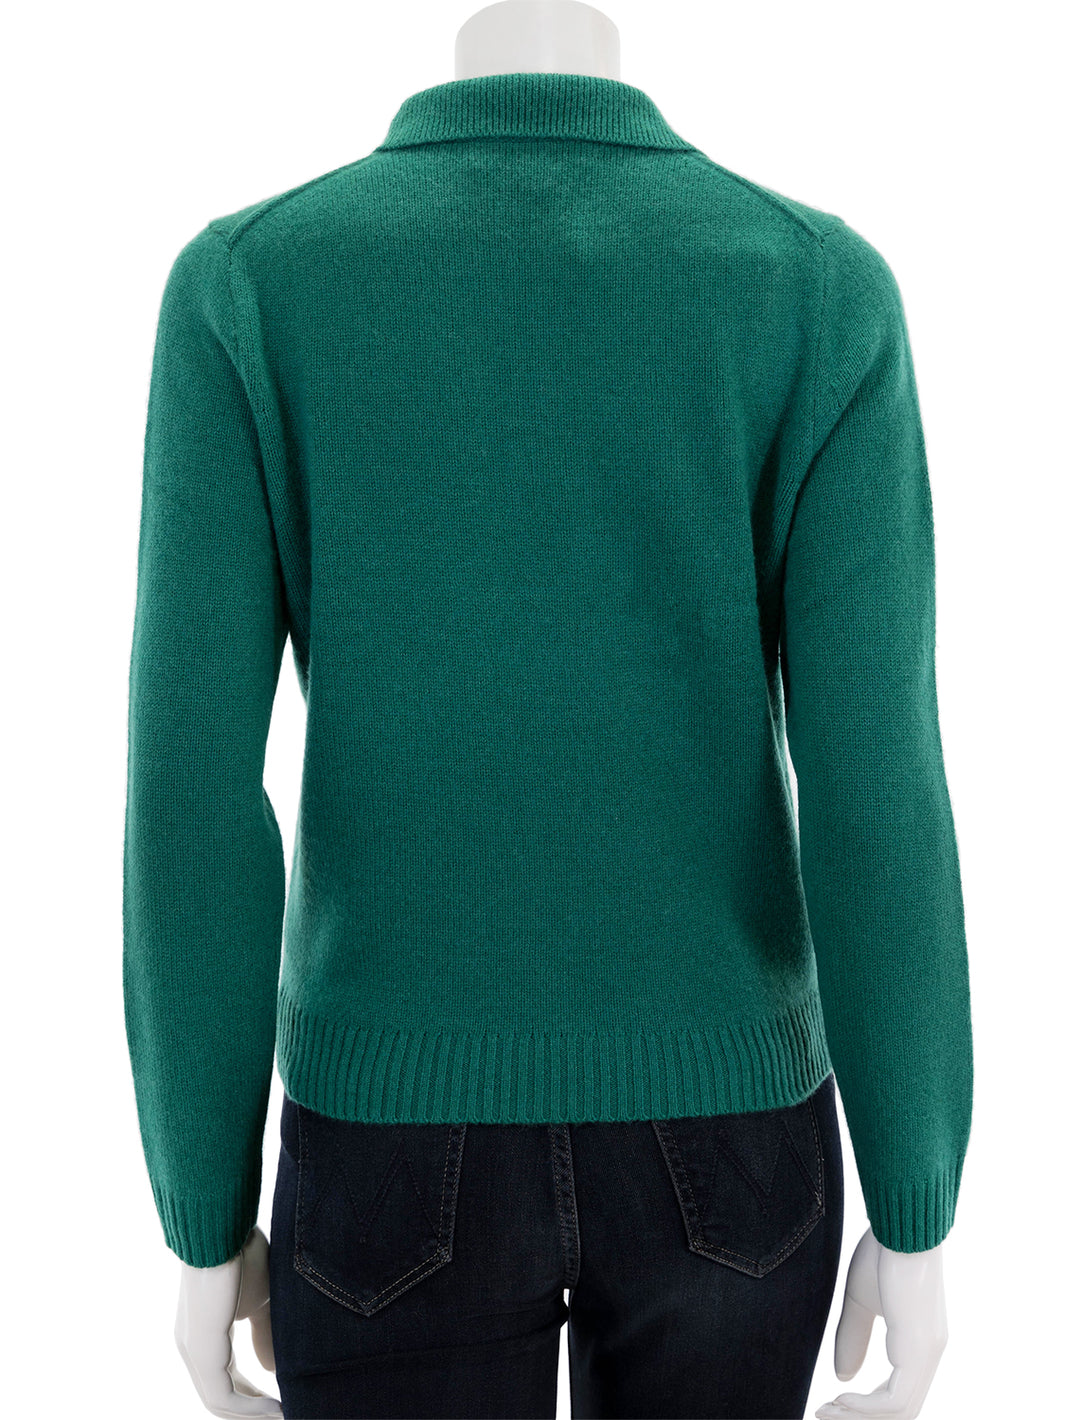 Back view of Alex Mill's cashmere alice polo sweater in kelly green.